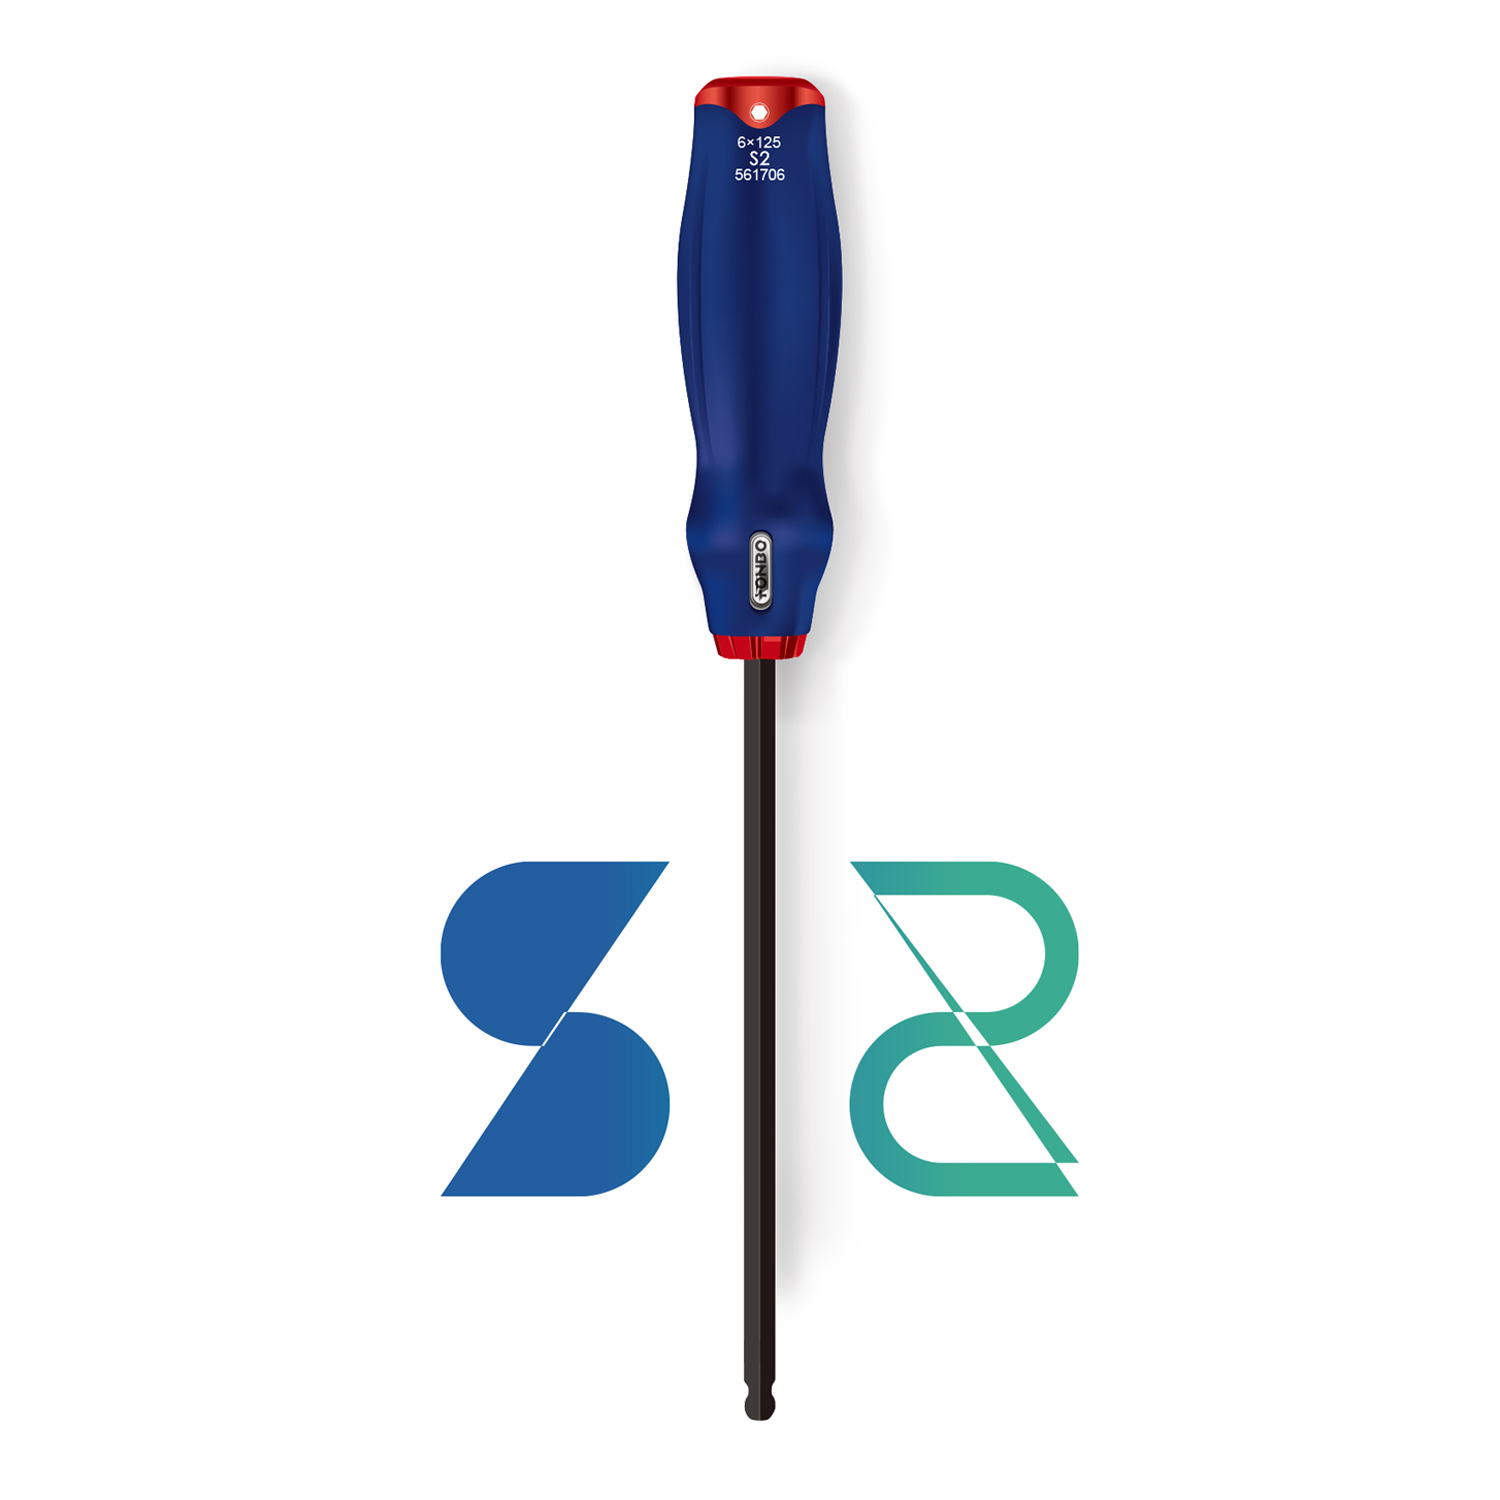 Hex Key Screwdriver With Ball Tip